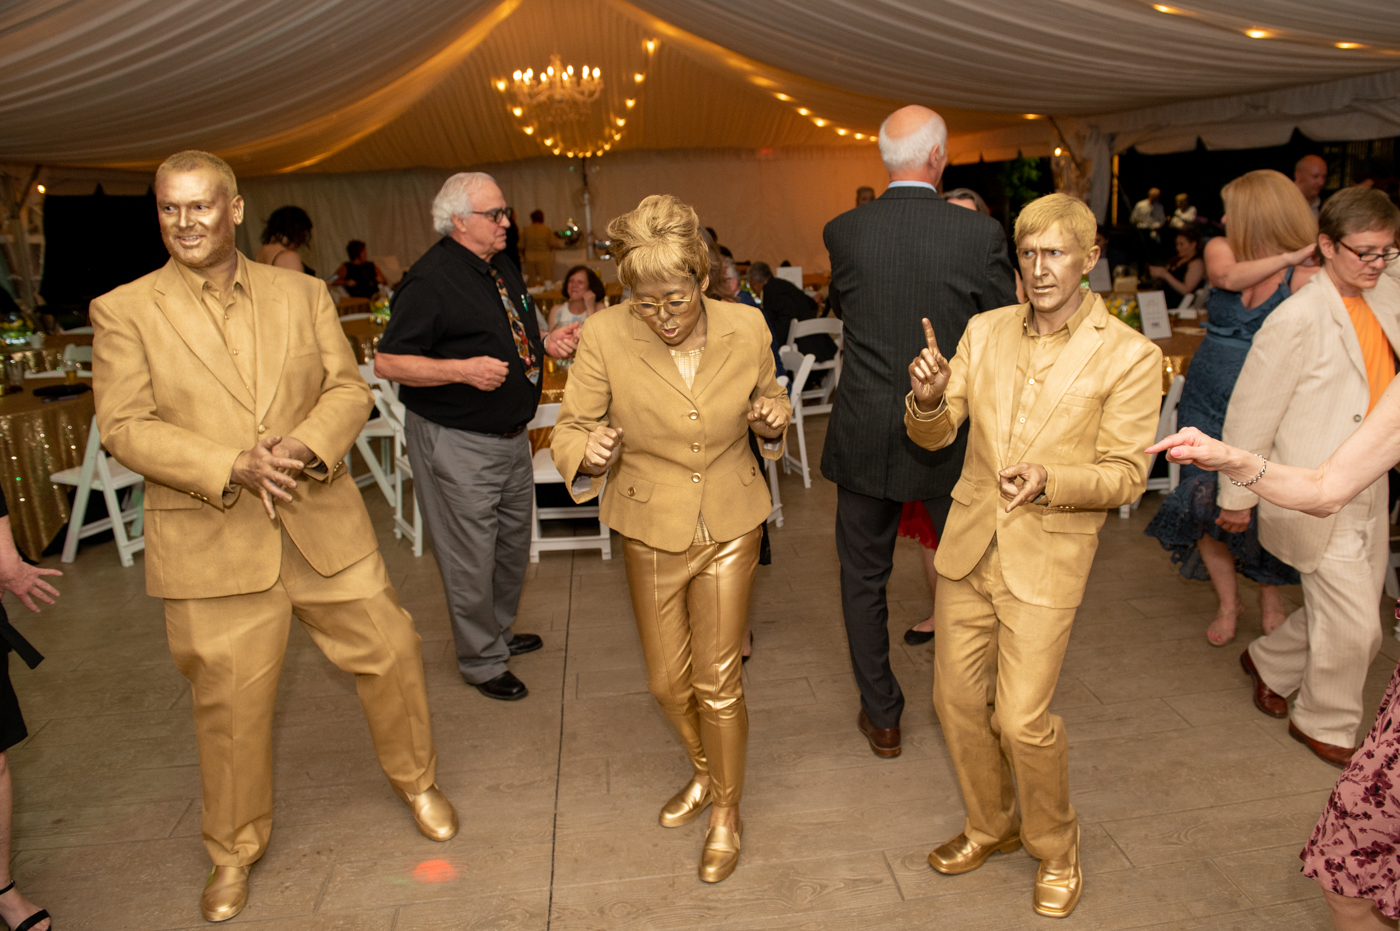 3 people dress in all gold covered in gold paint dancing in large tent